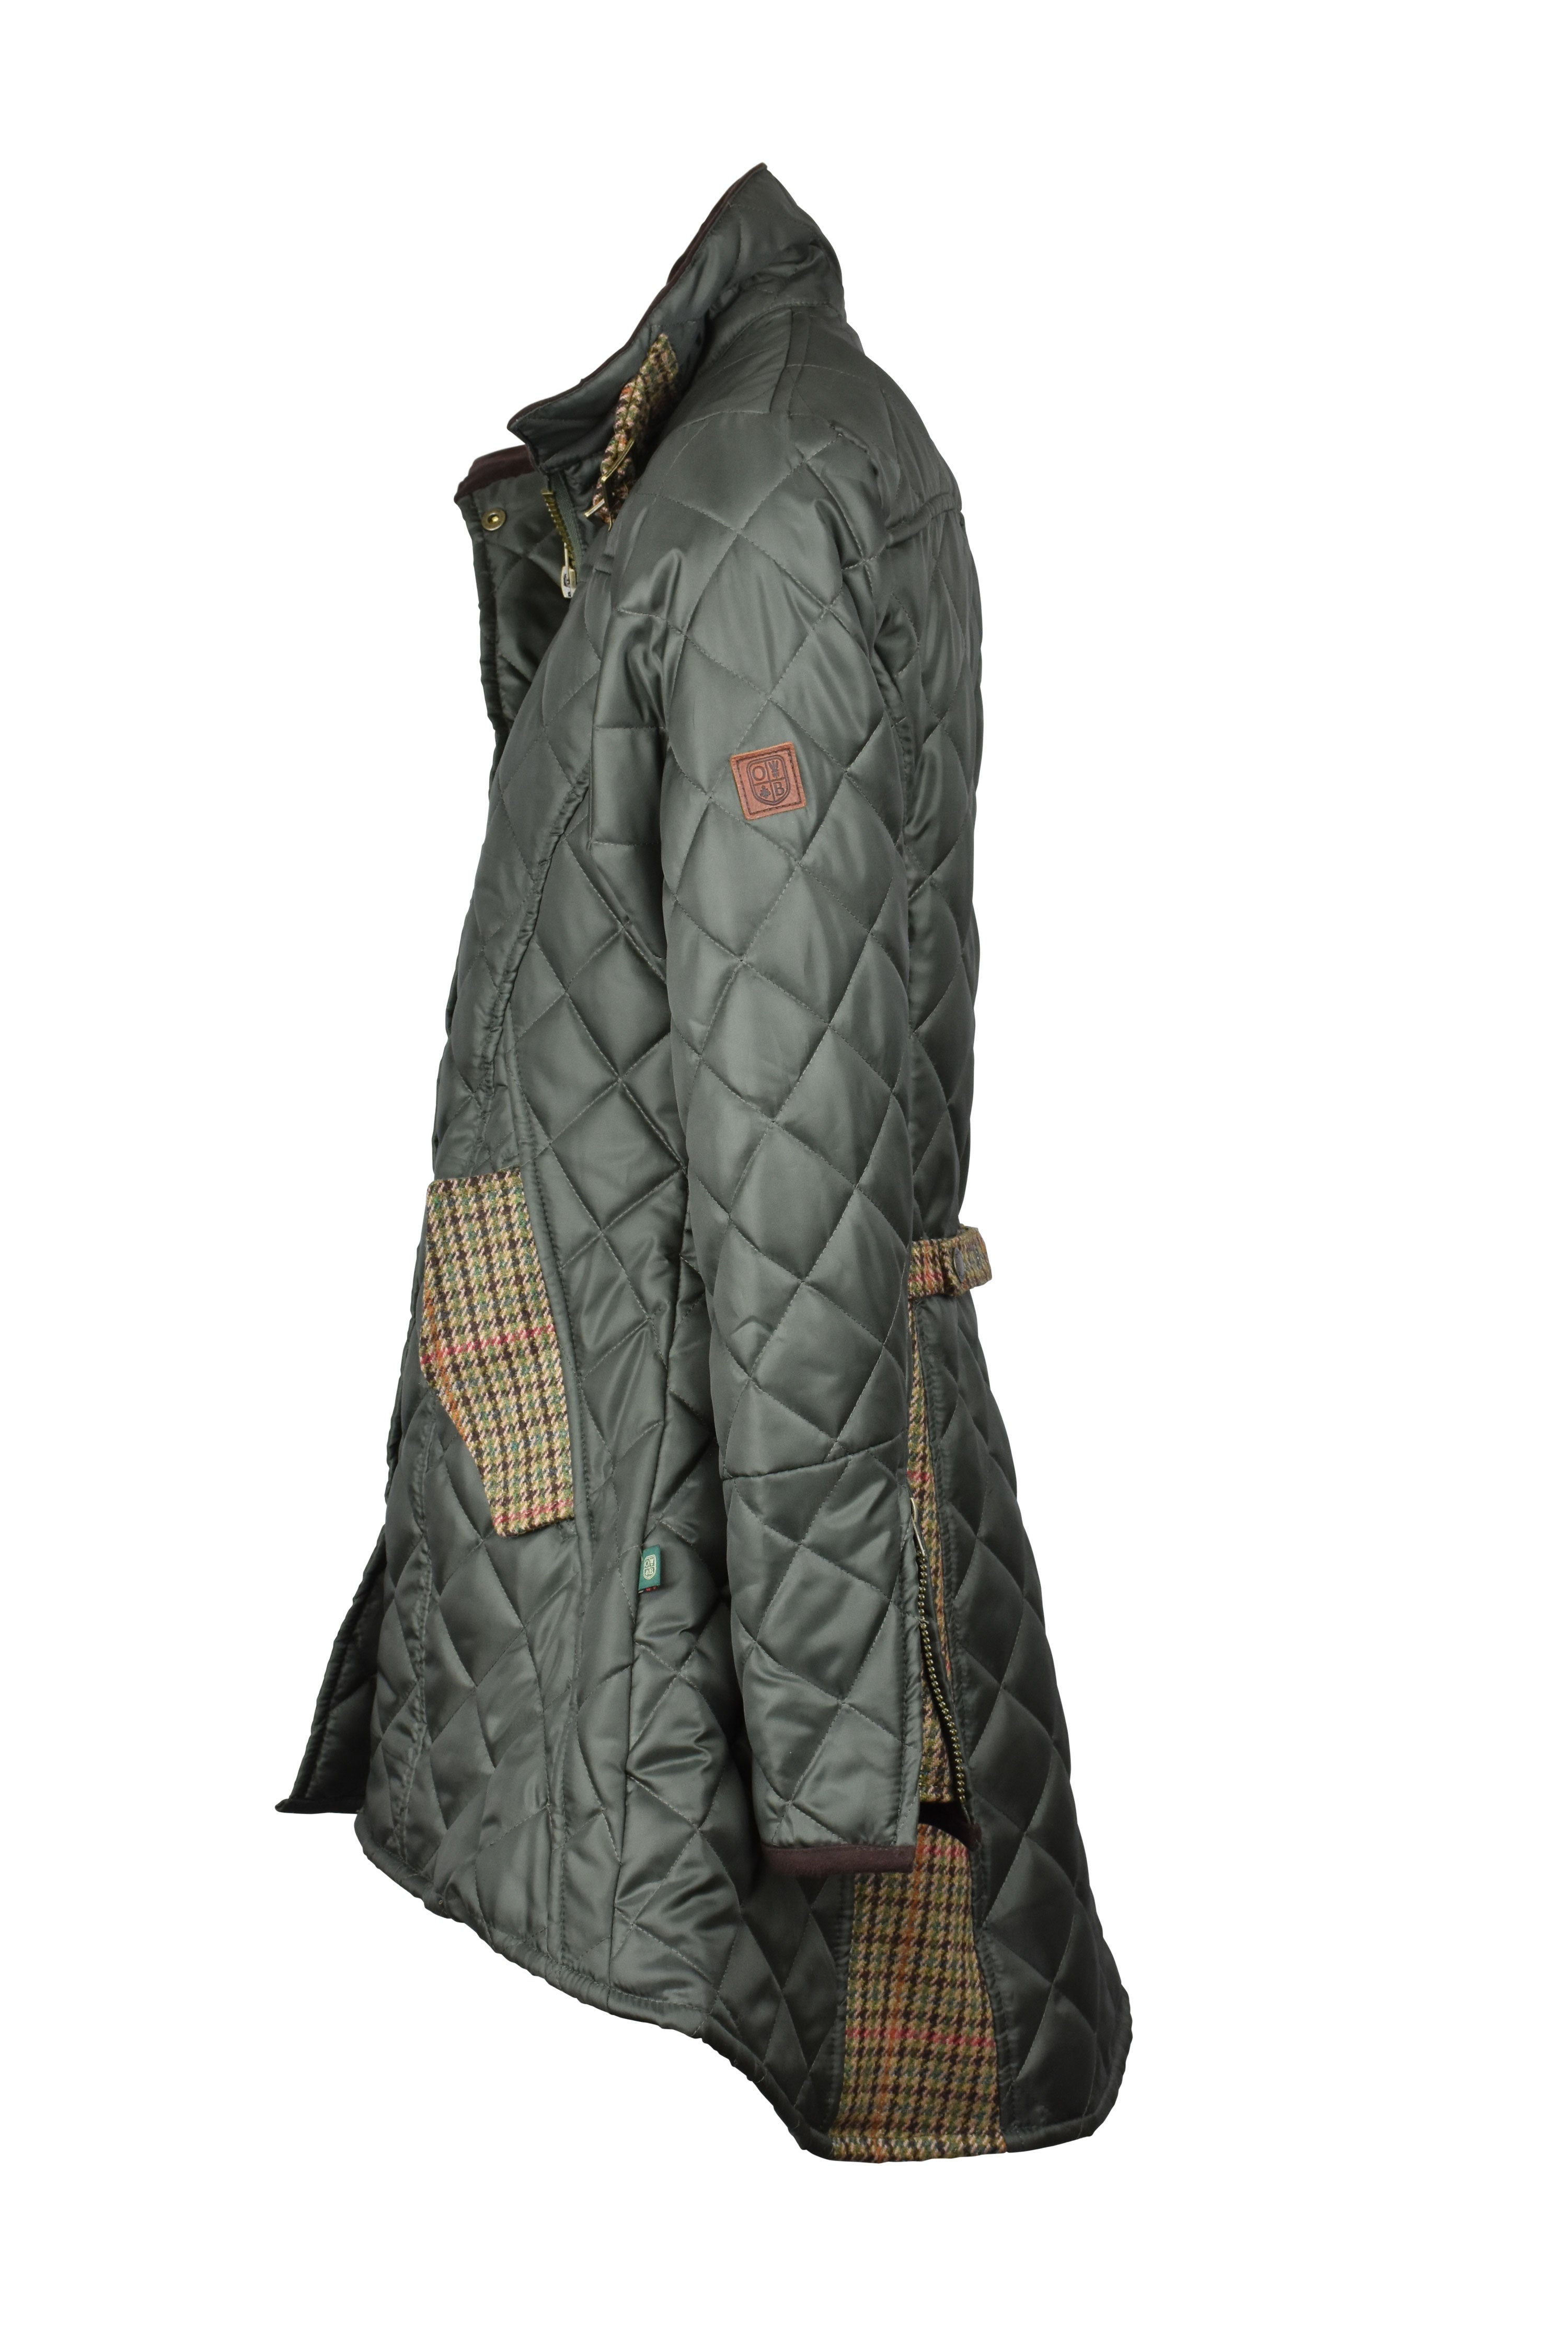 W15 - Womens Roxy Quilted Jacket - DARK OLIVE - Oxford Blue